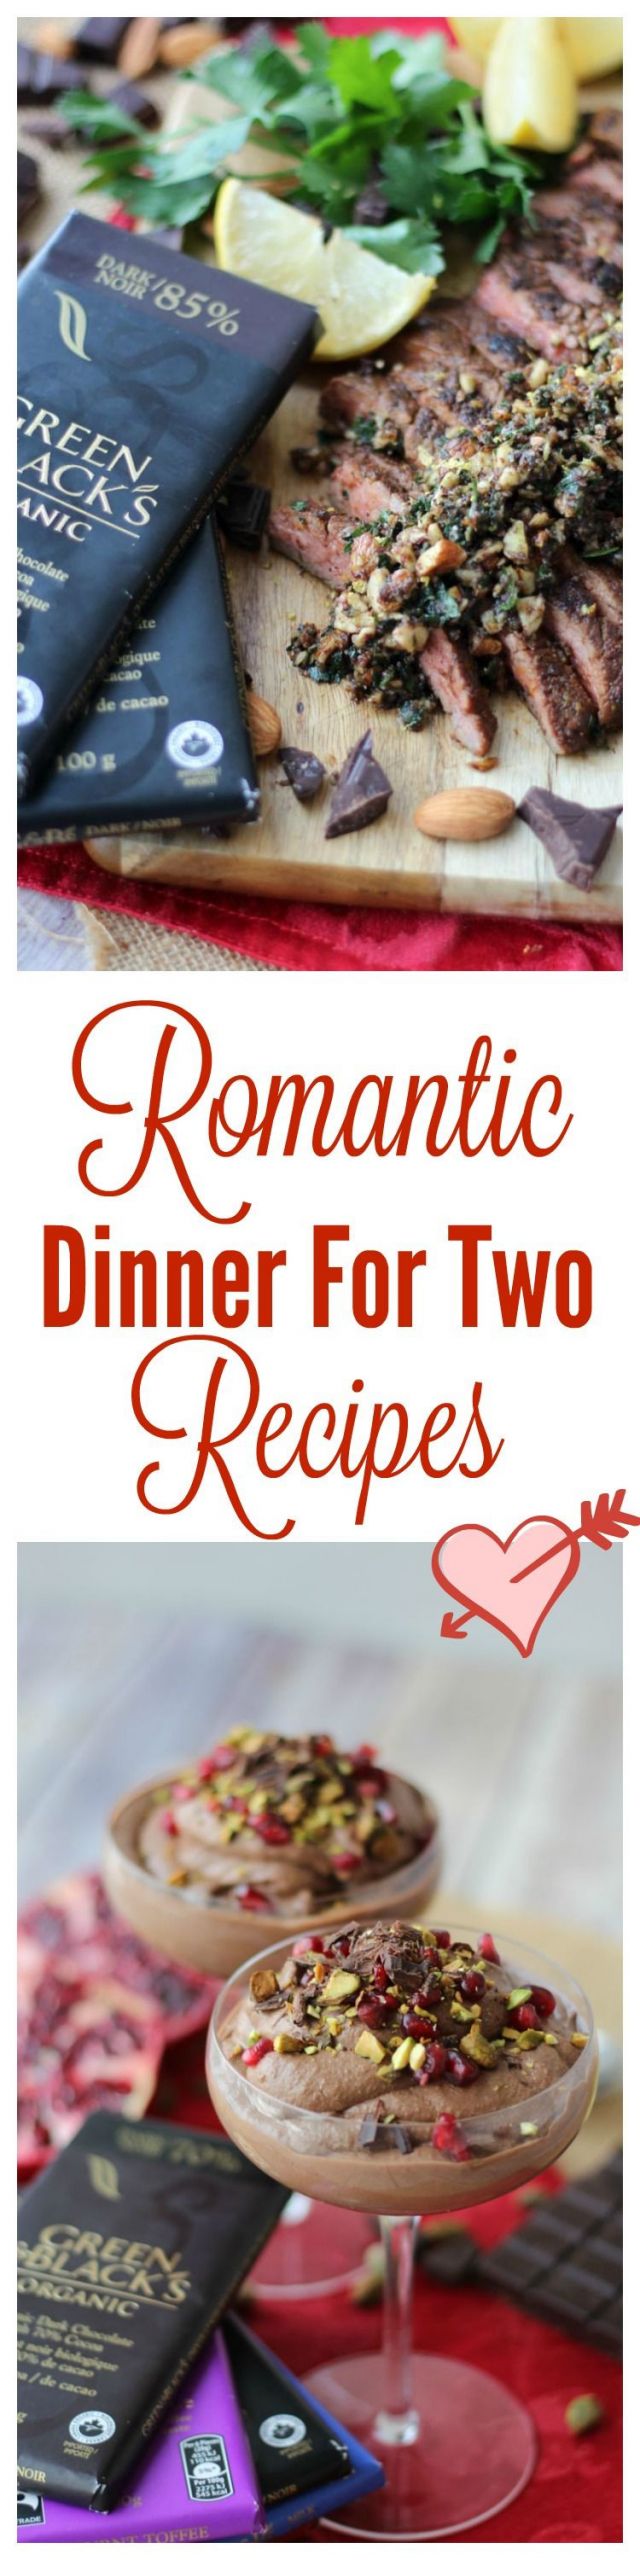 Cheap Romantic Dinner Ideas
 Romantic Dinner For Two Recipes an appetizer main dish